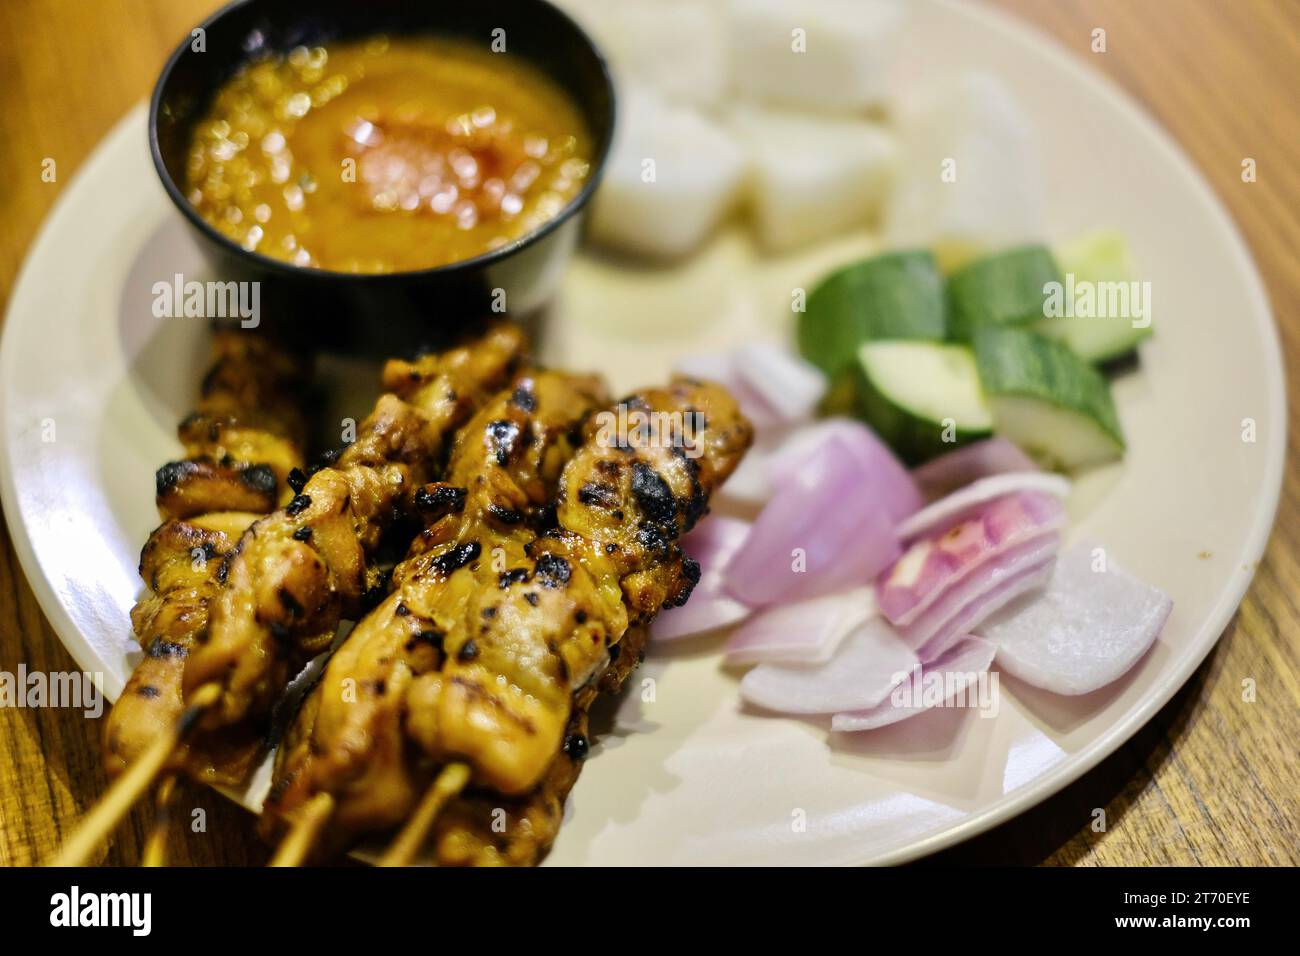 Chicken satay skewers with red onion, cucumber slices and rice cakes and peanut dipping sauce at Limapulo: Baba Can Cook, a Peranakan restaurant Stock Photo